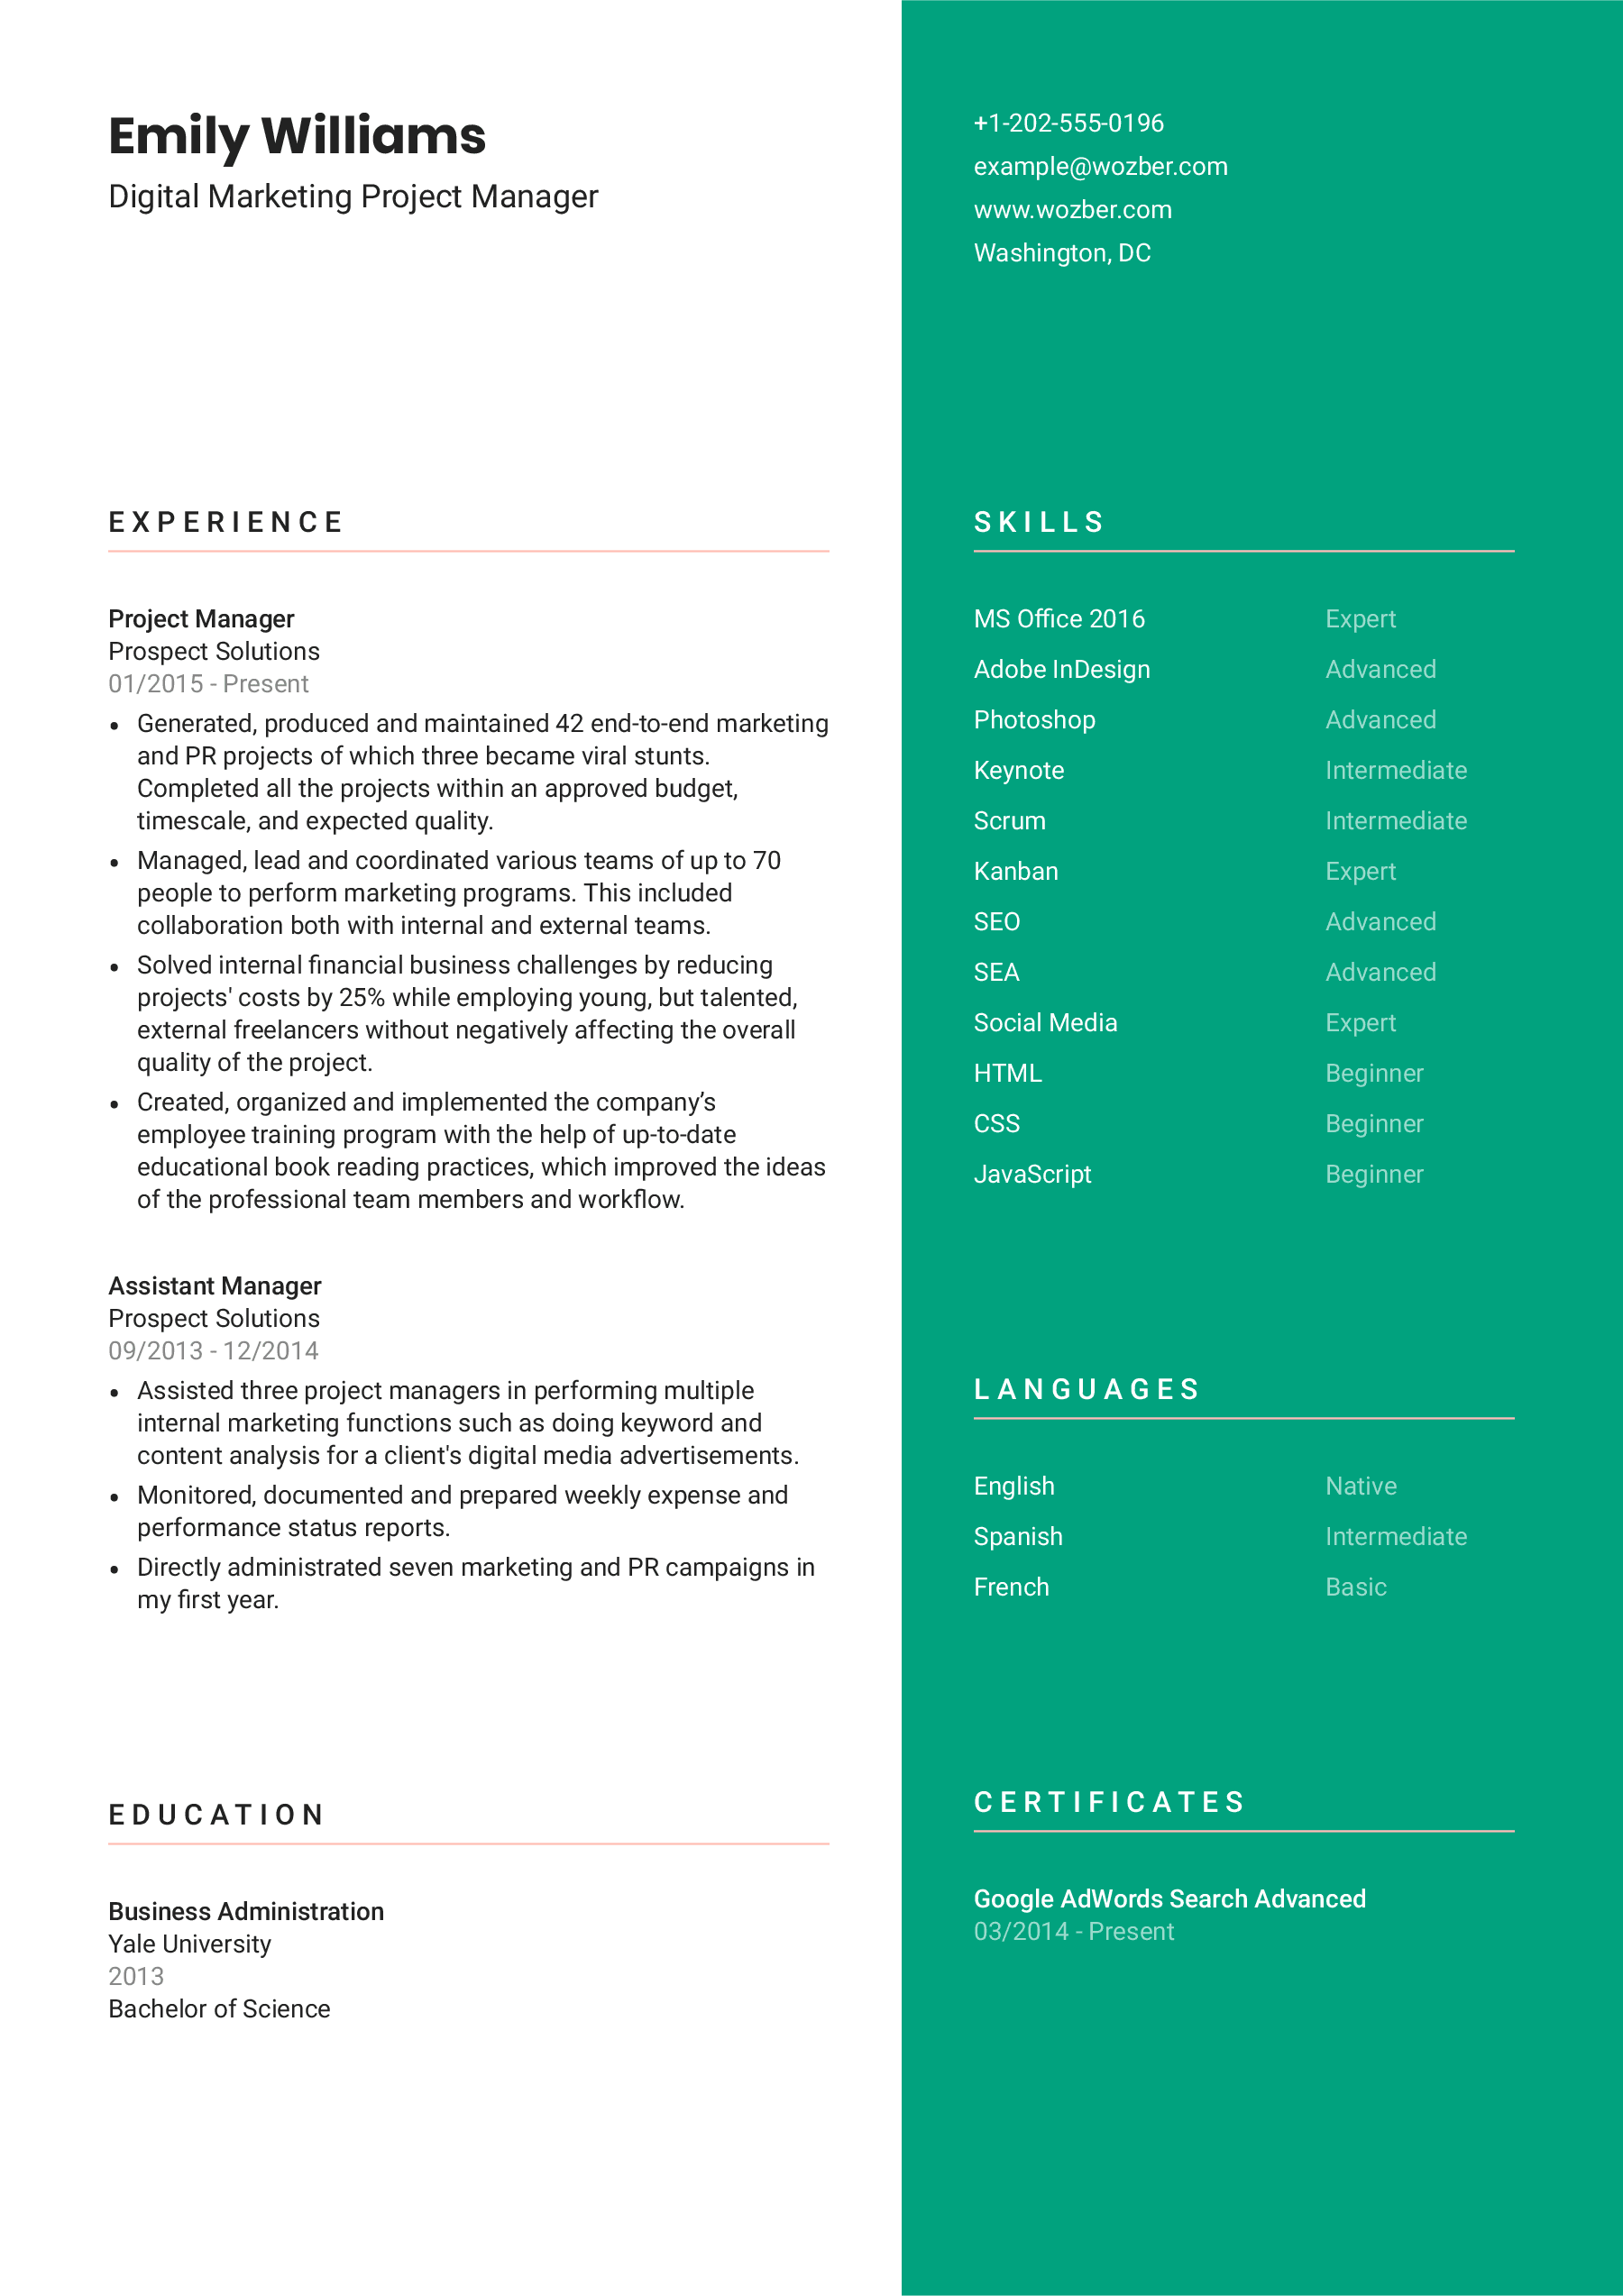 A green modern resume template for those who see a job hunt as an opportunity in the middle ground between contemporary and creative.